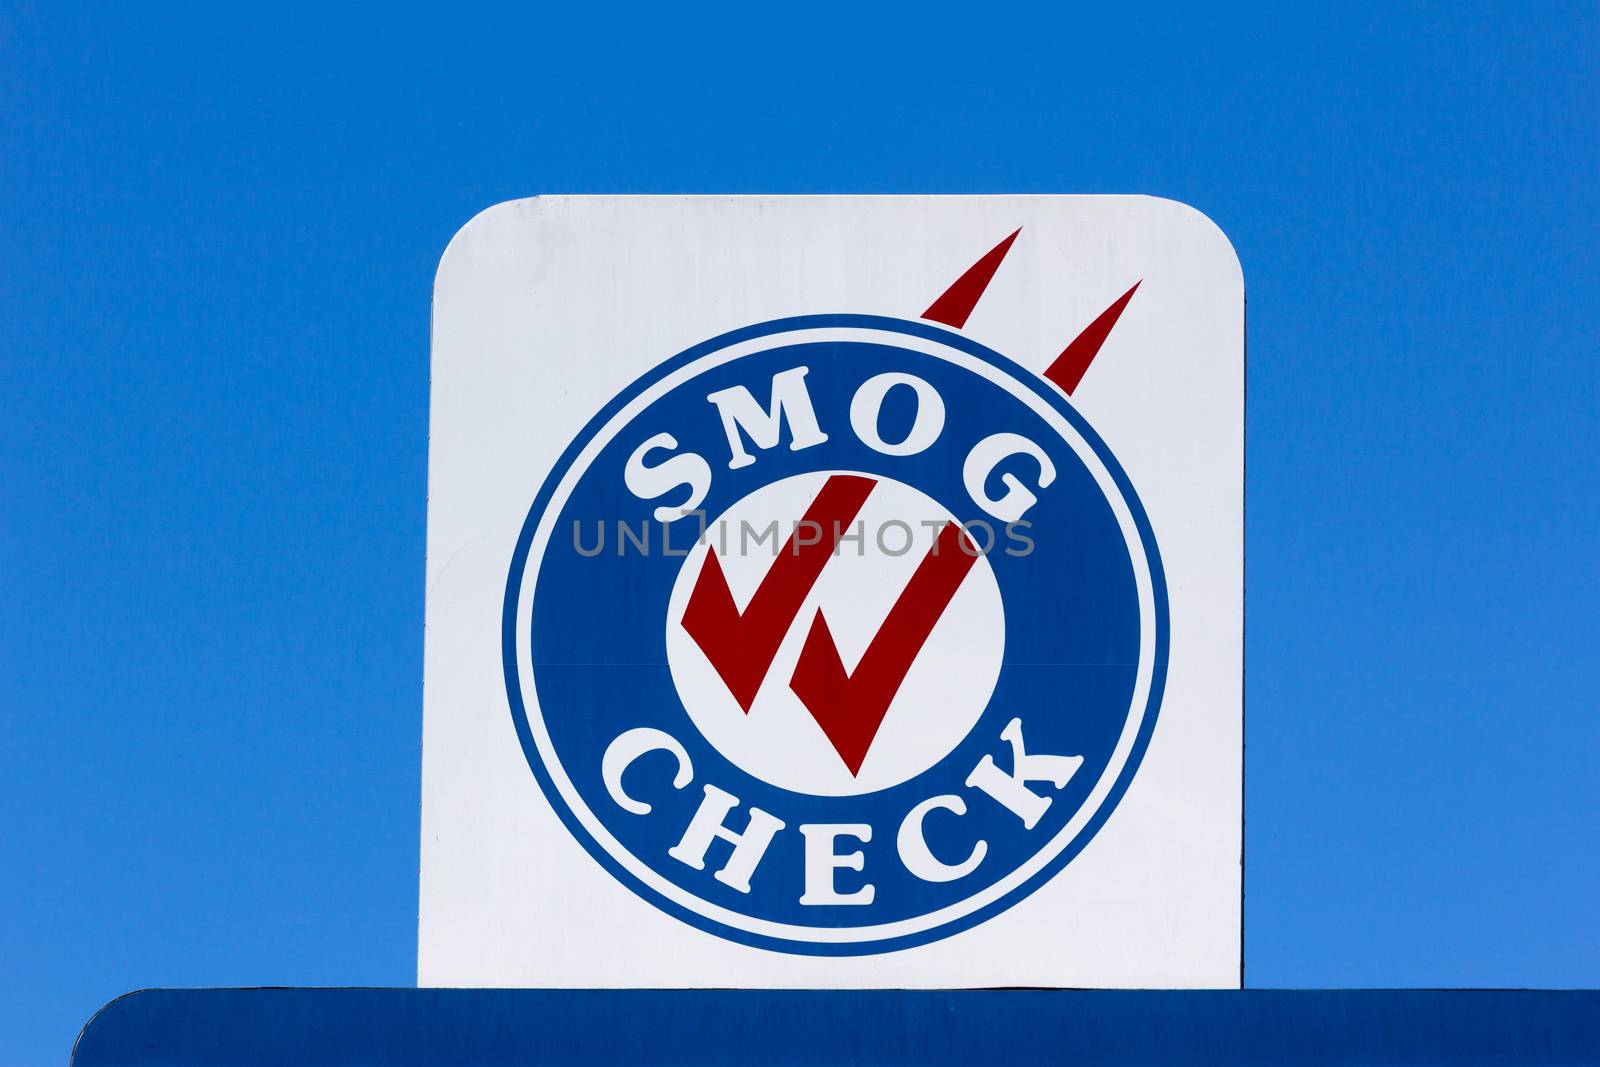 Smog Check sign at automotive repair shop in the United States